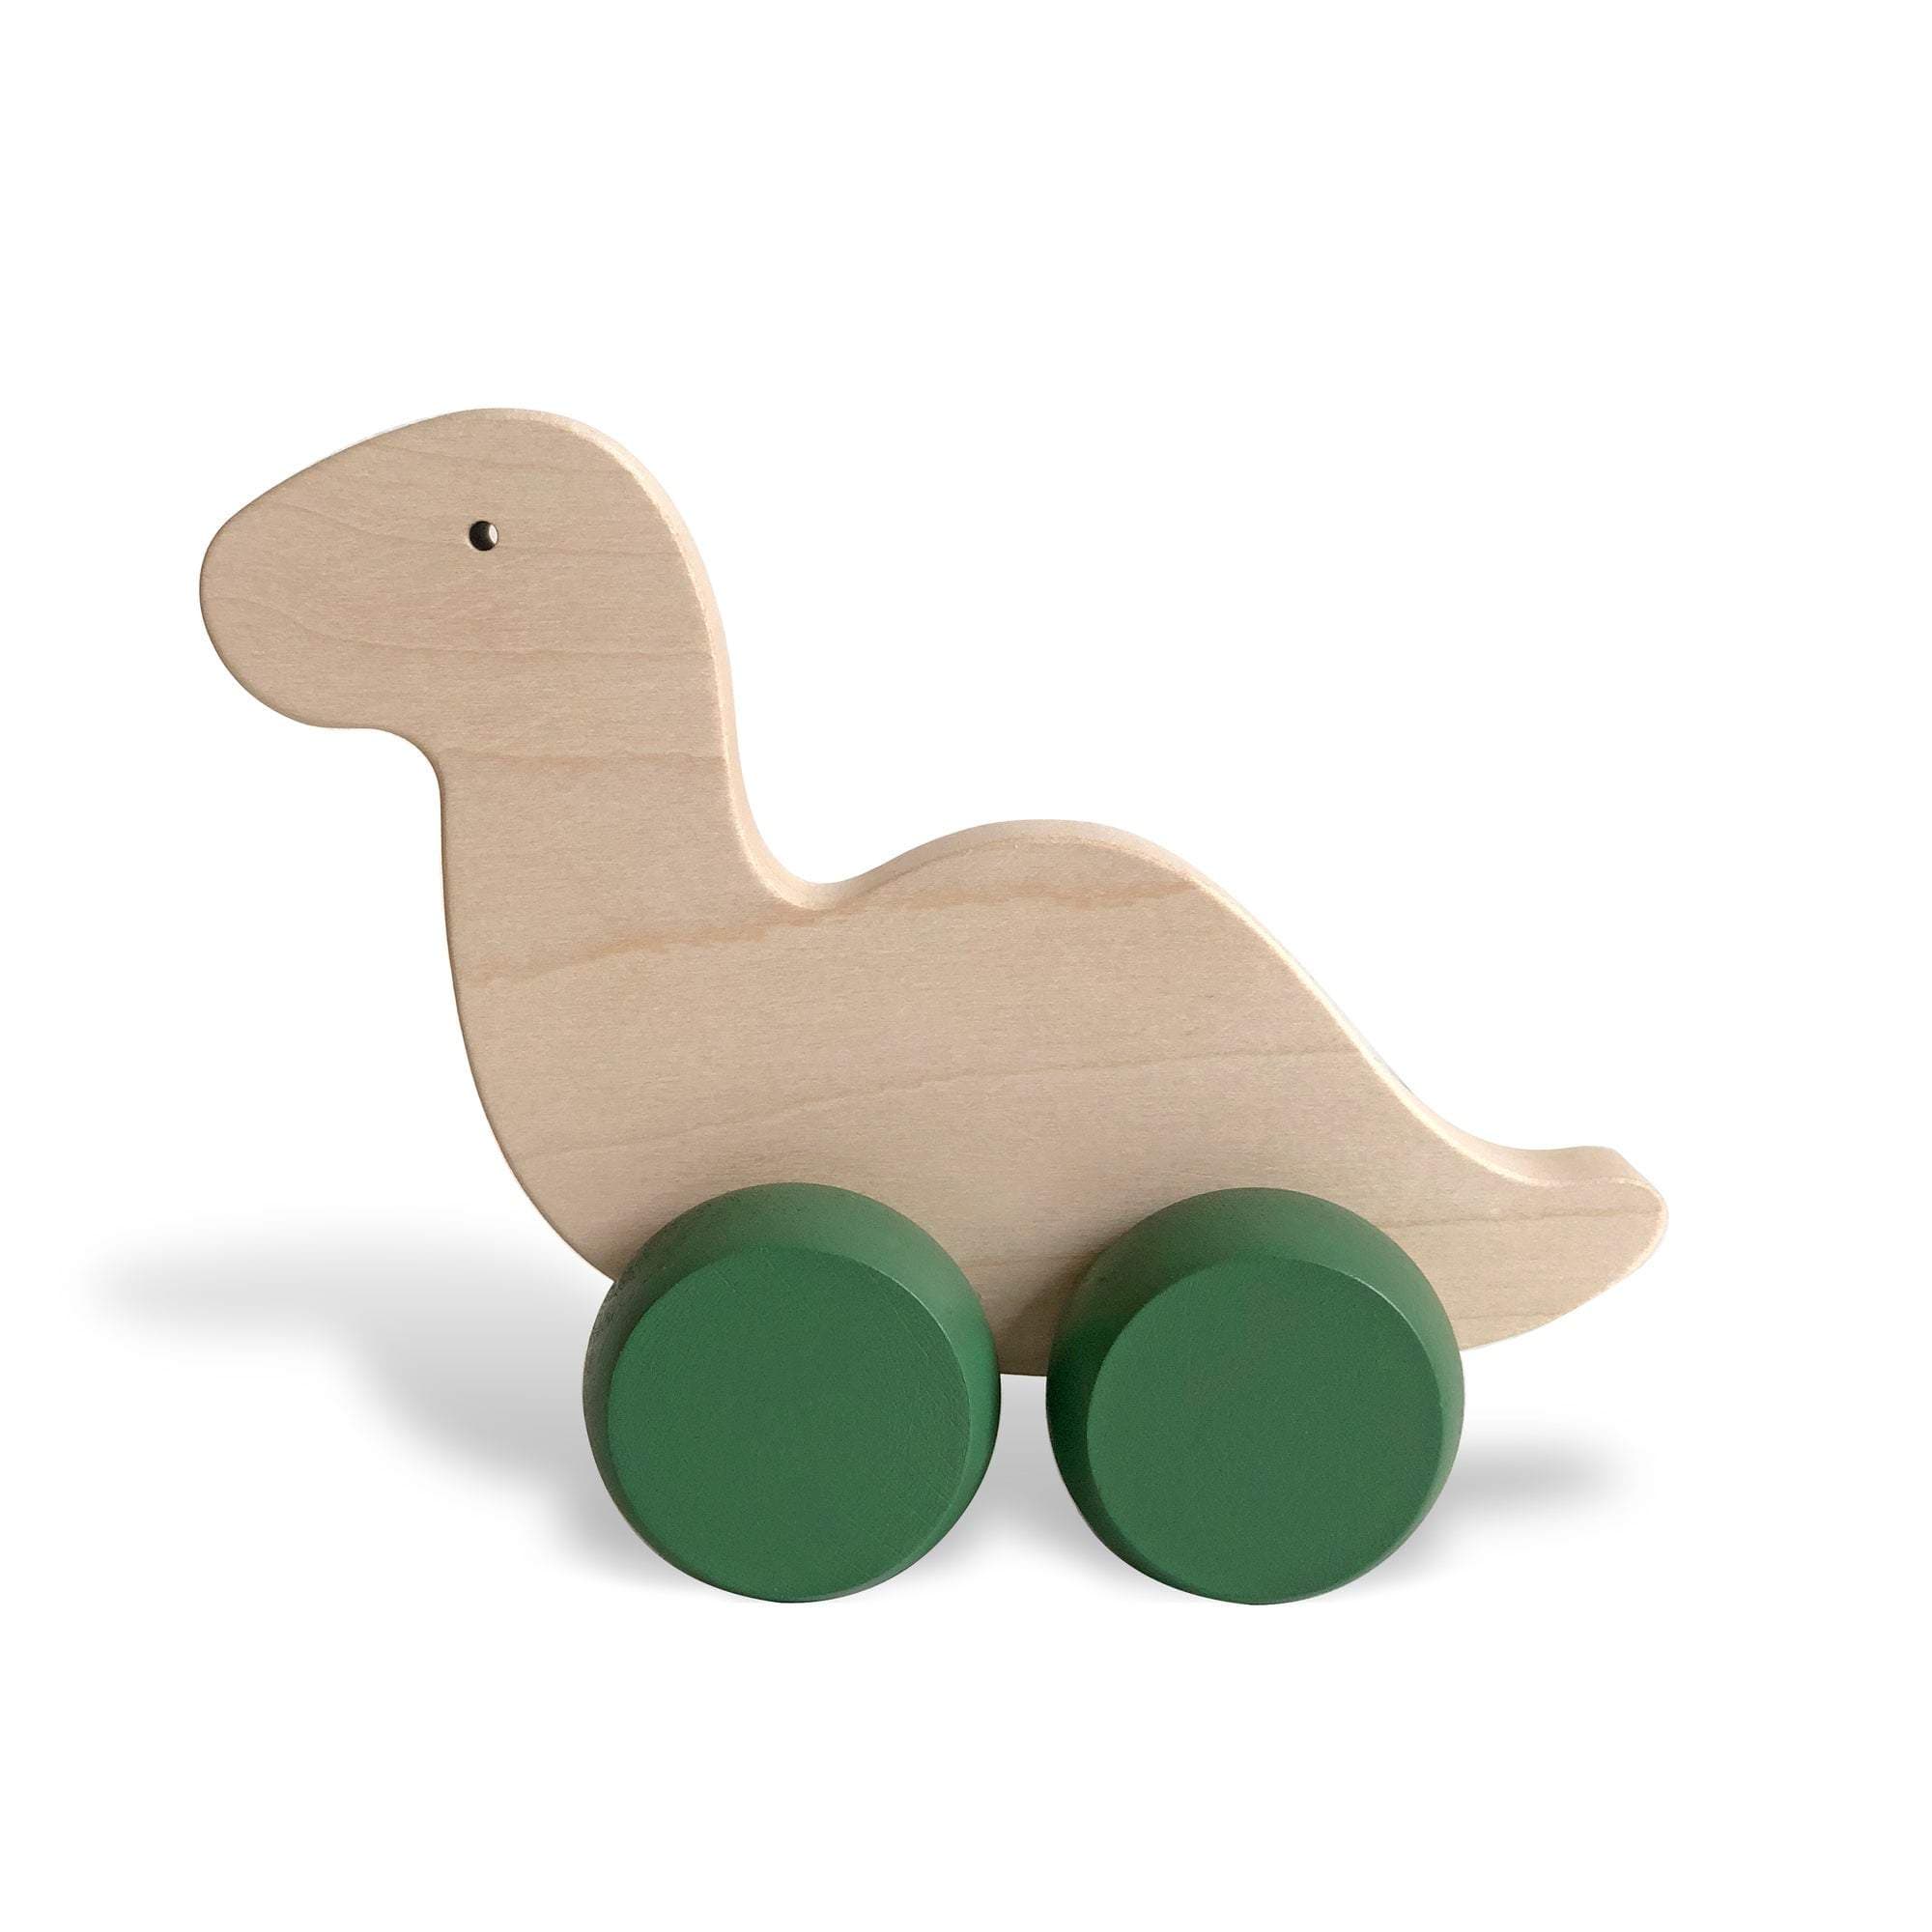 A cute push dinosaur with green wheels which has been handcrafted and hand-painted in Europe. Made from natural maple wood, it’s perfect for encouraging imaginative play with little ones. Ideal for small hands to hold, it aids in the development of fine motor skills.